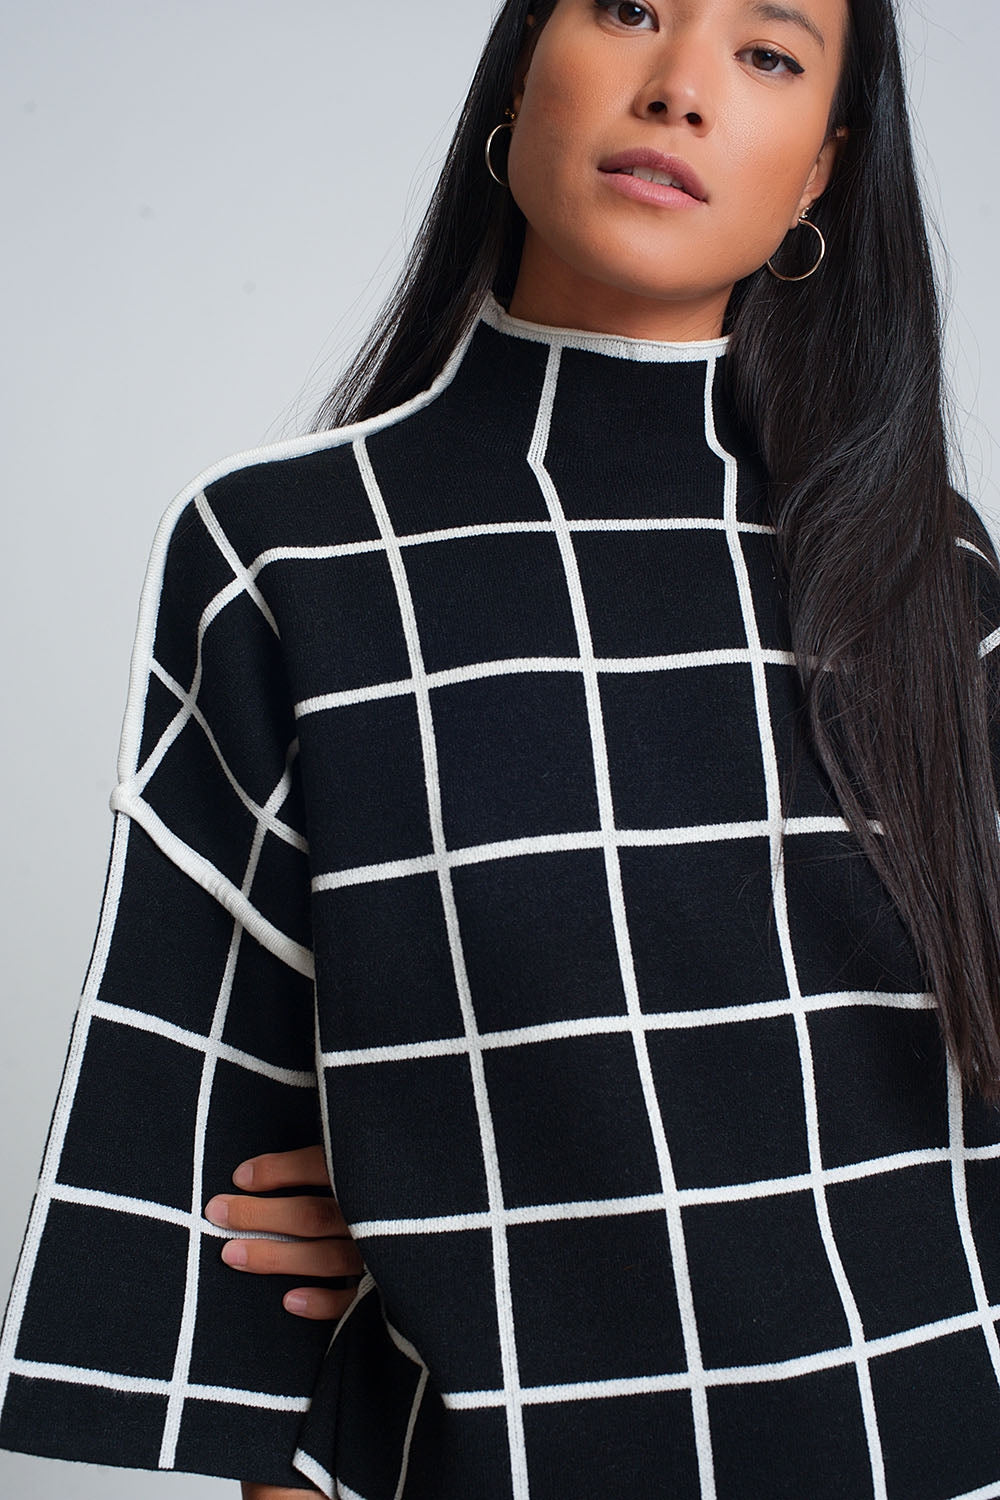 Q2 Black sweater with chequered print in 3/4 sleeve and high neck